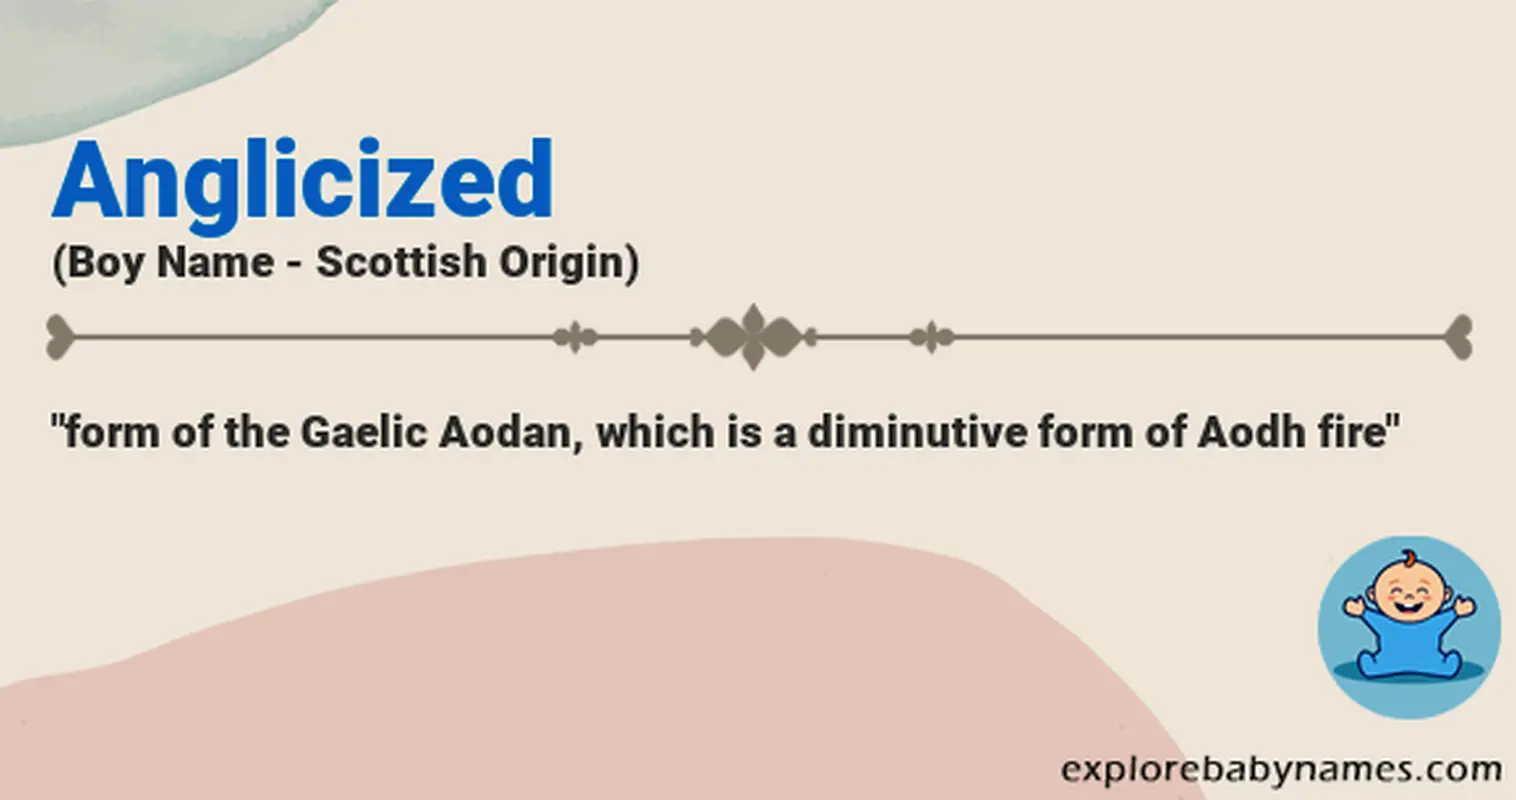 Meaning of Anglicized